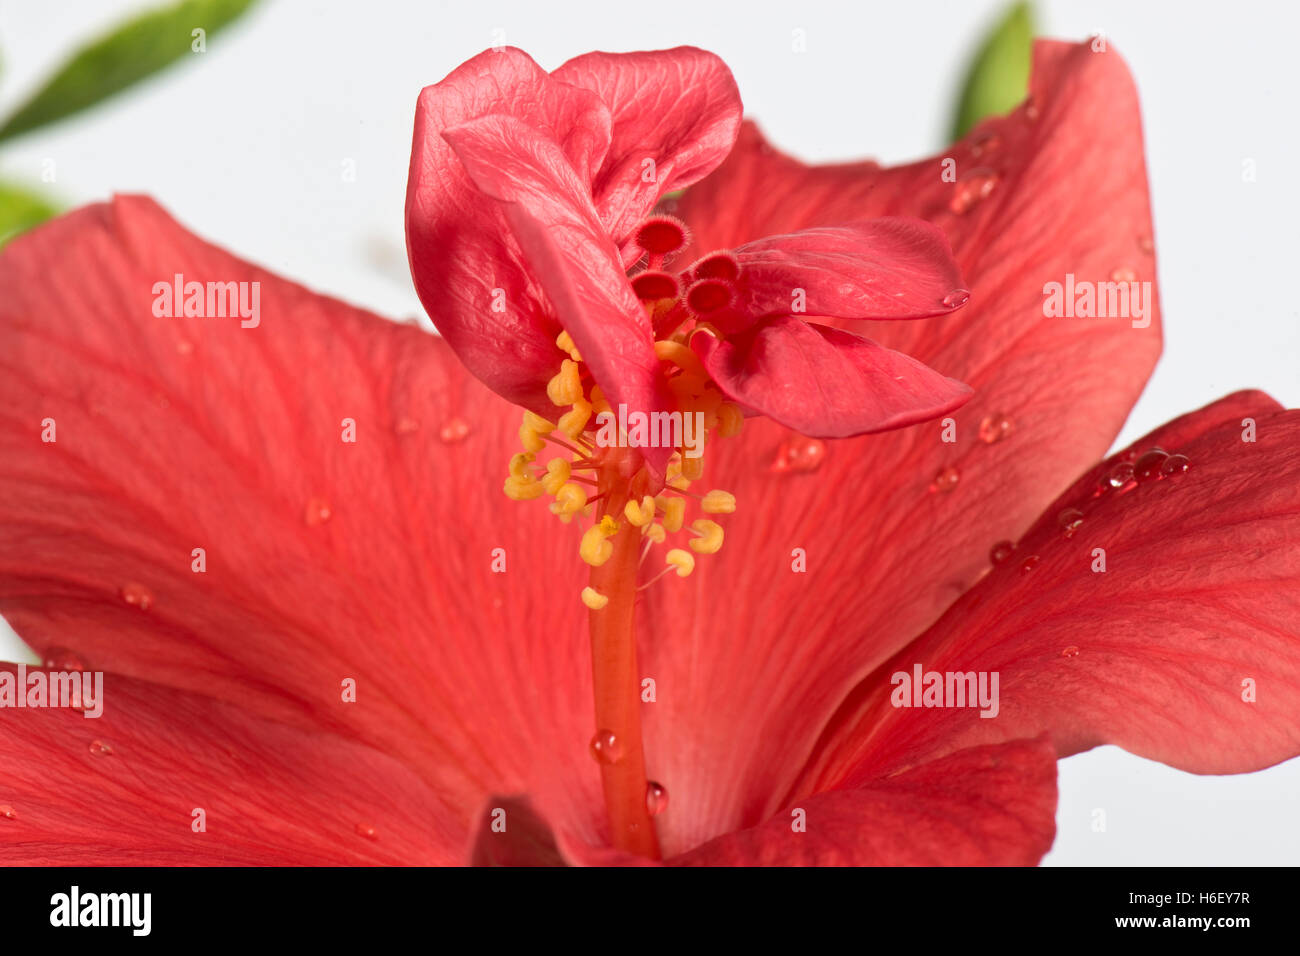 A flower of Hibiscus rosa-sinensis where the style has developed petal like structures between the stamens Stock Photo